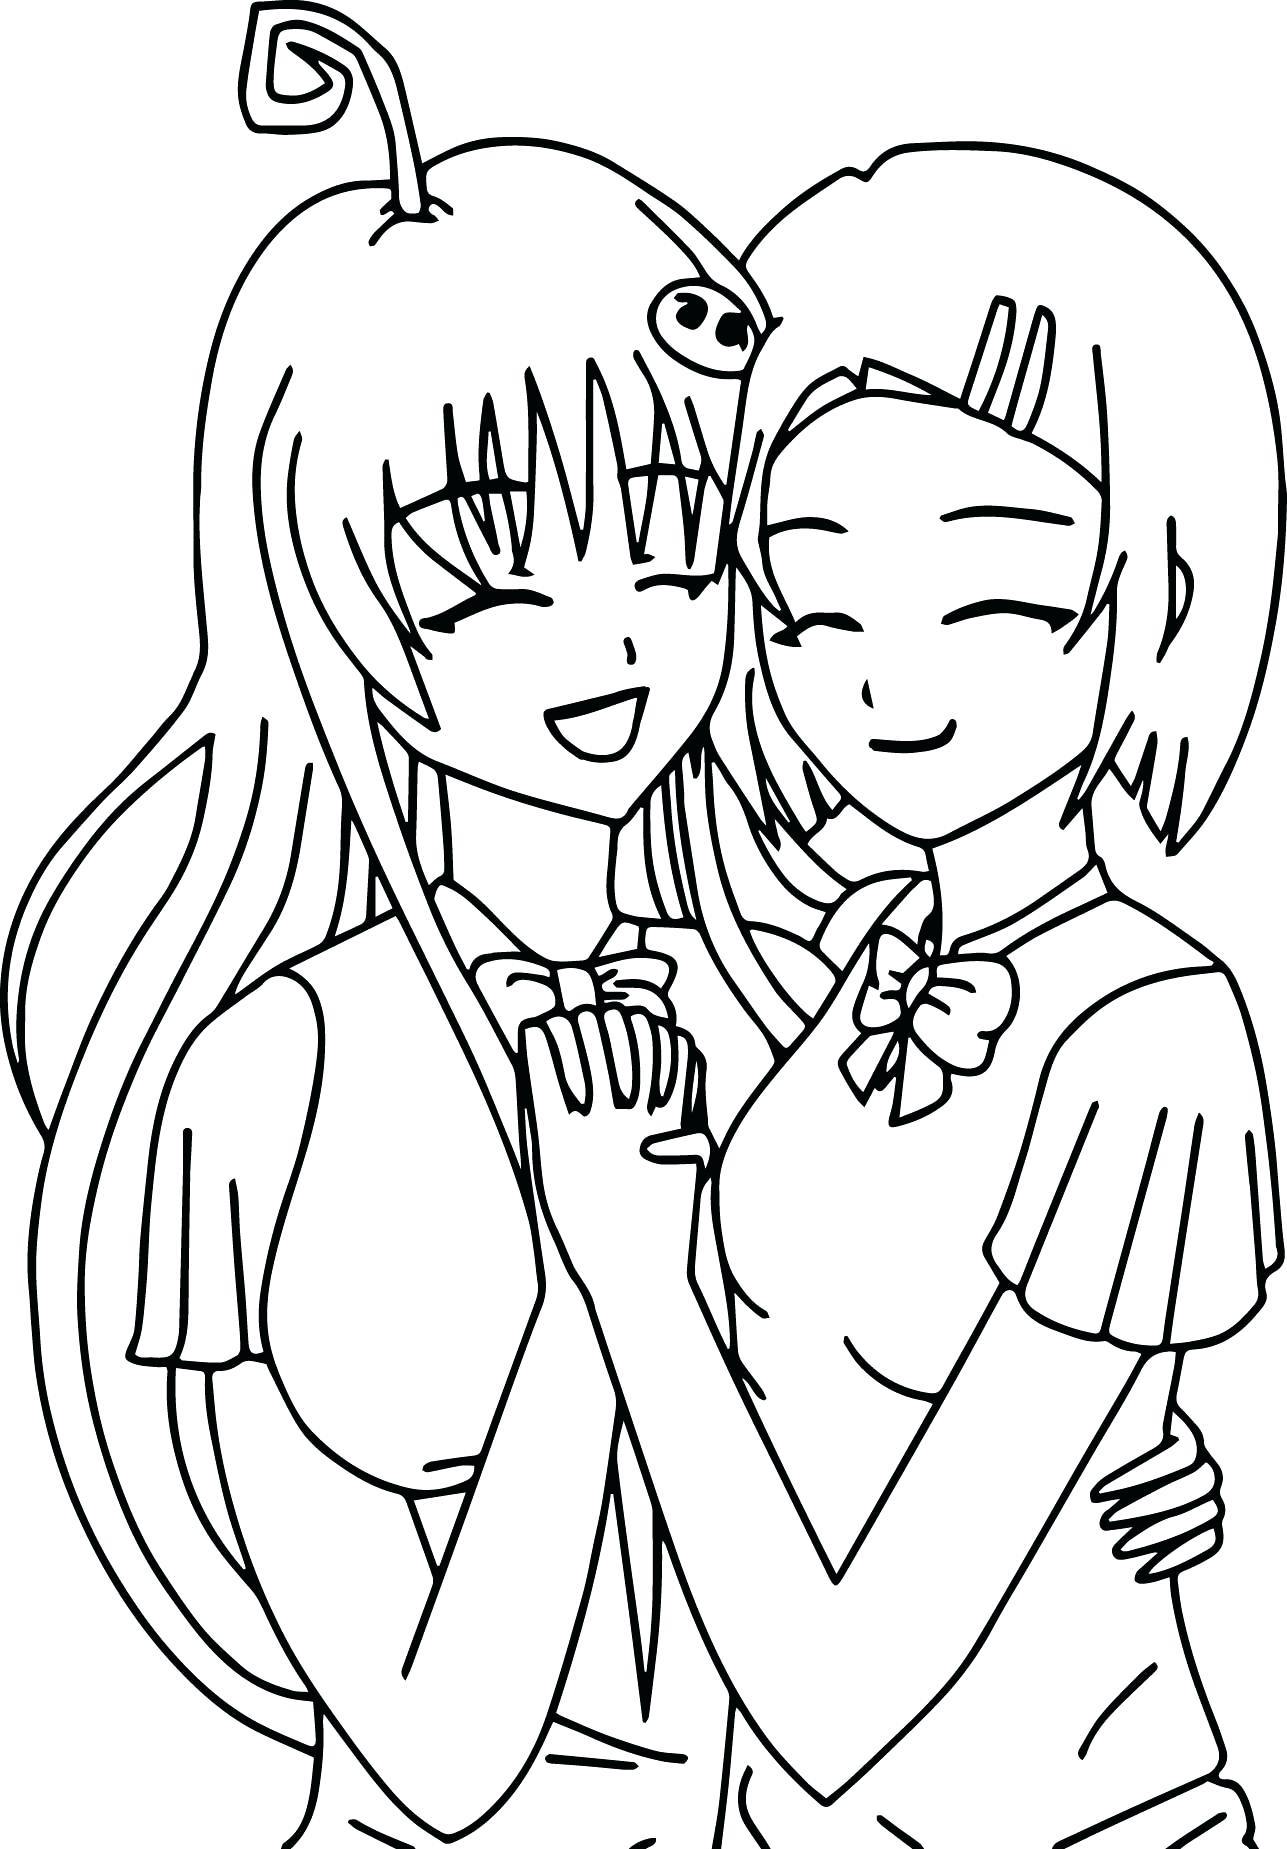 Best Friend Coloring Pages To Print at Free